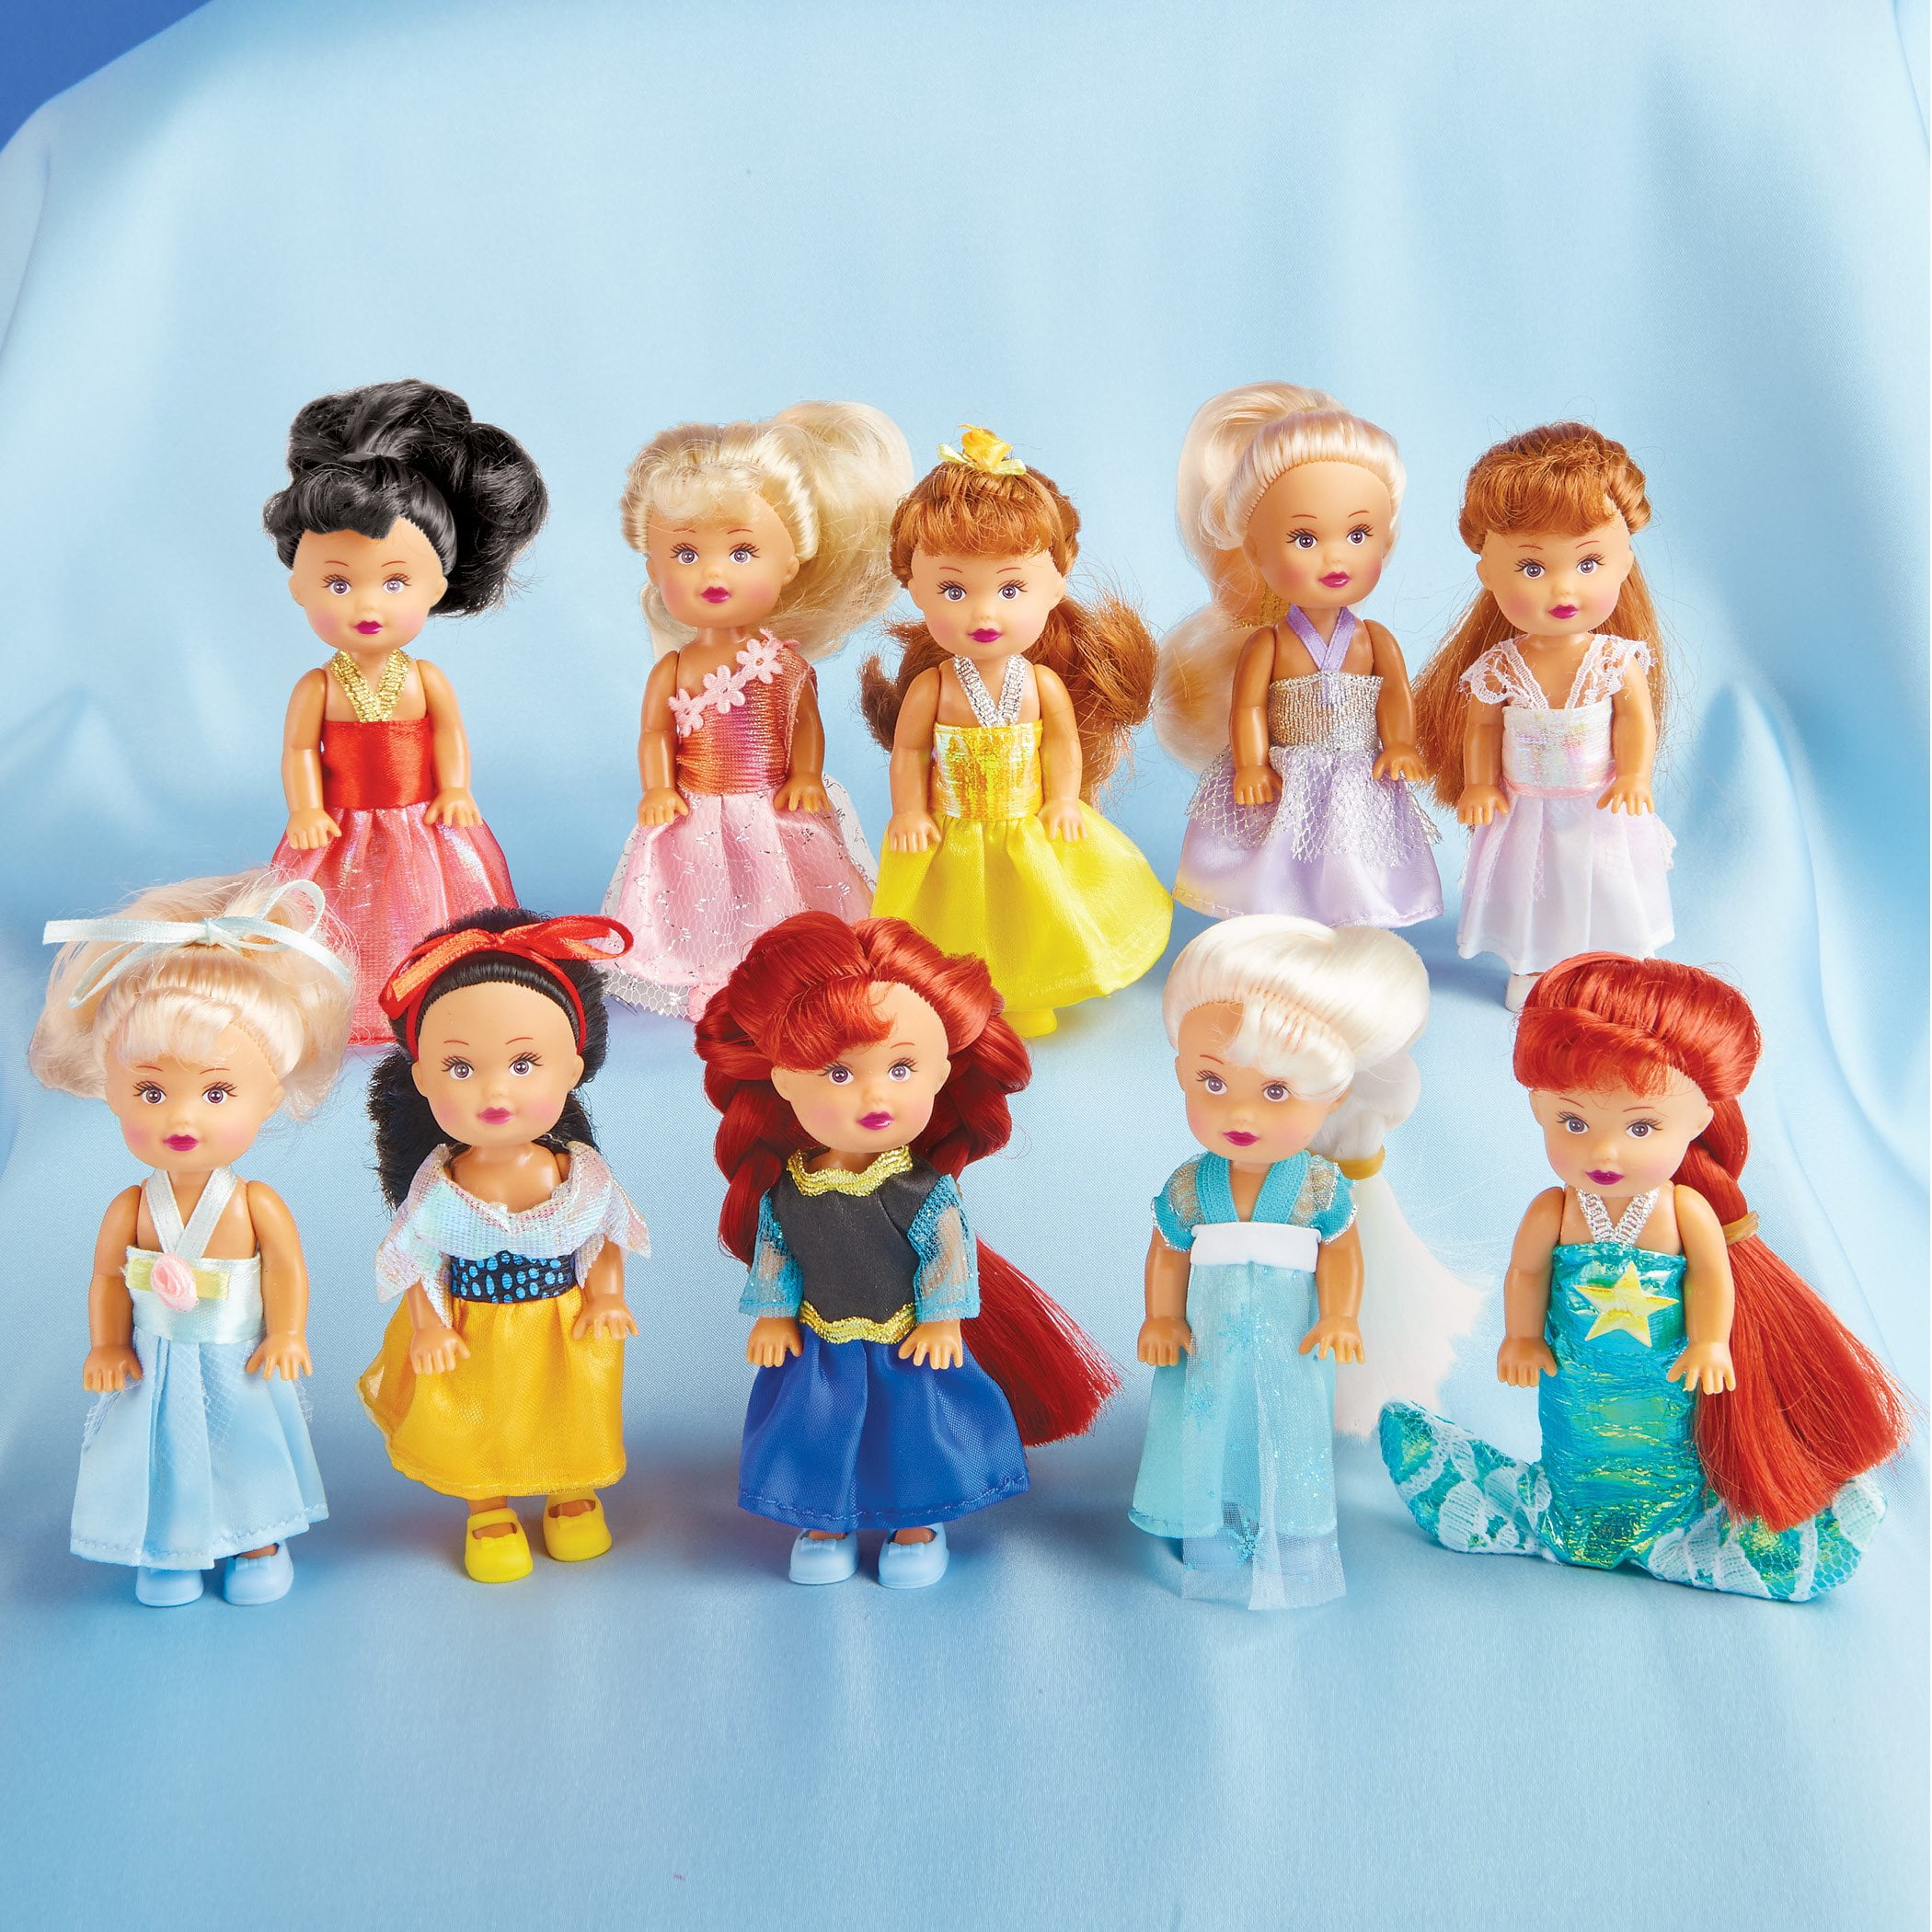 Pink Disney Princess Dolls Mermaid Snow White Cute Characters and Figurines Cake/Room/Party Decoration 8 Pieces Car Ornaments Gifts for Girls